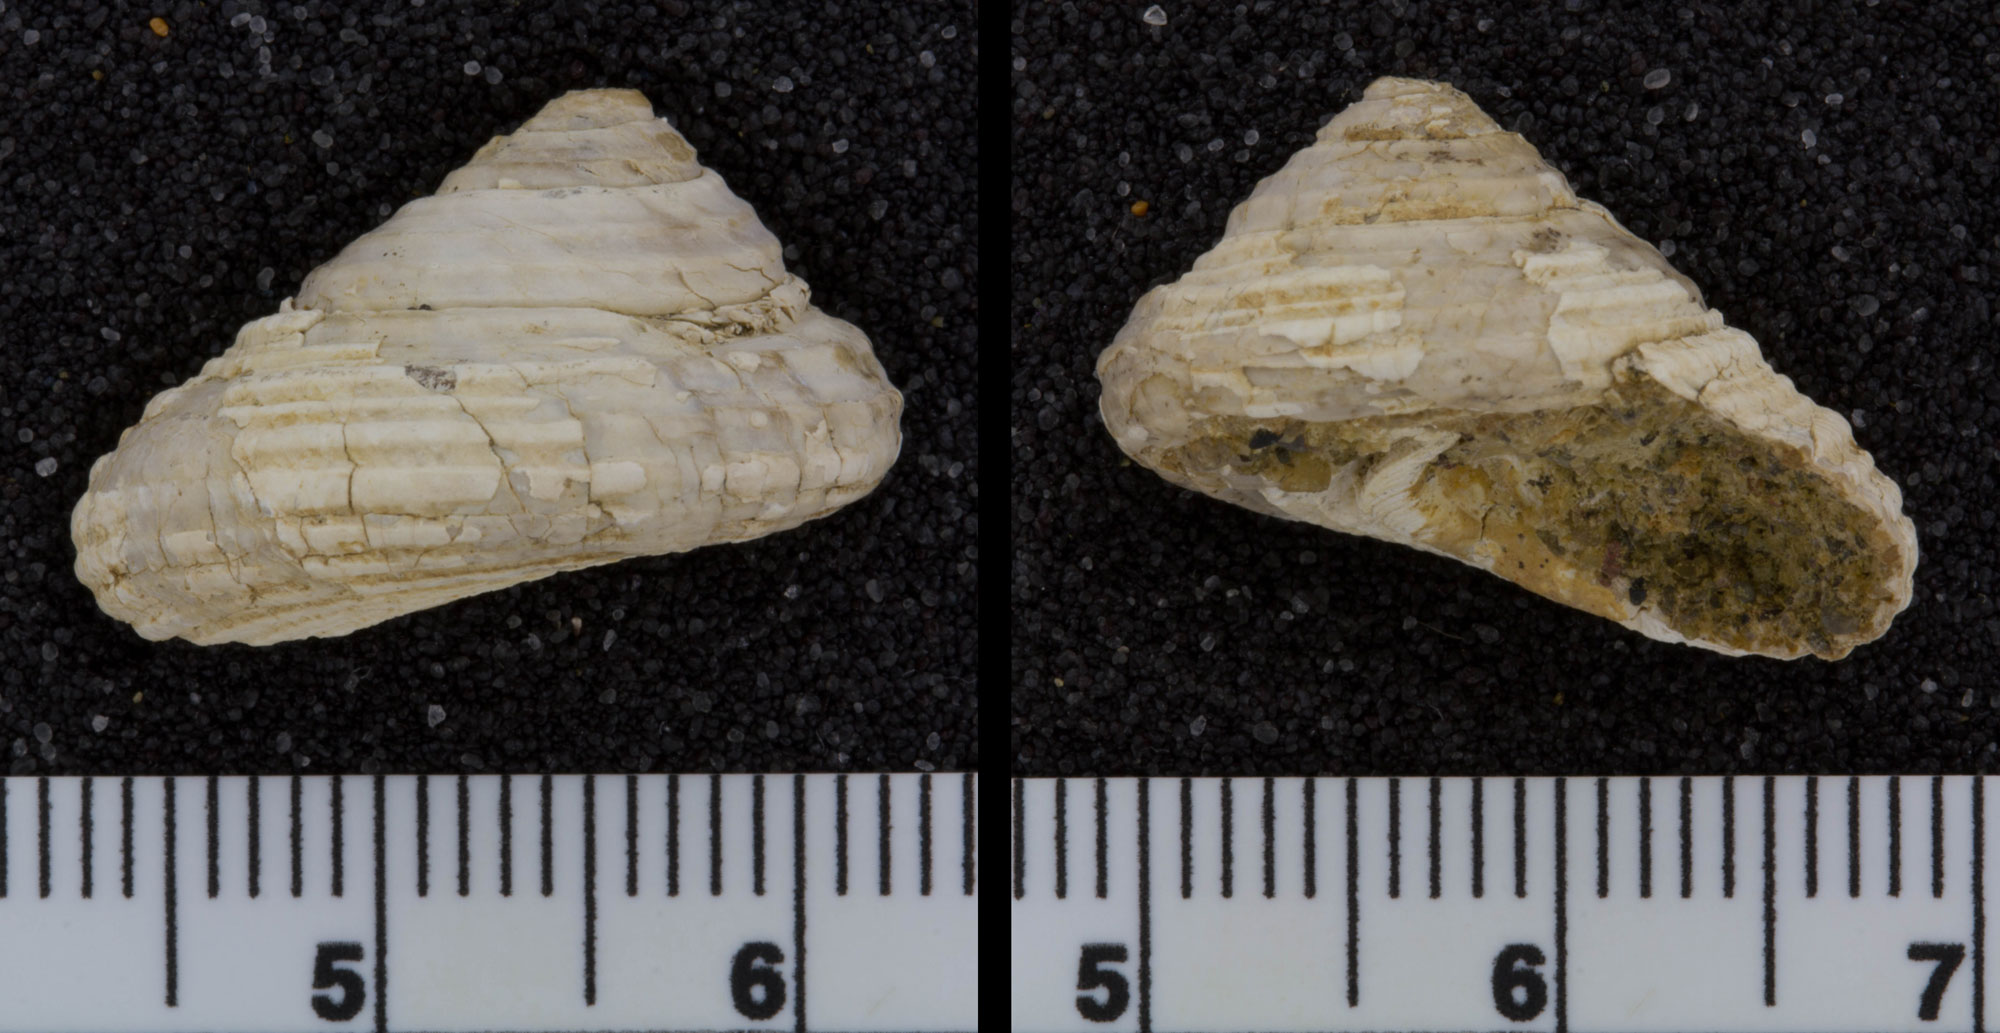 Photos showing two views of a fossil top snail shell. The shell is show with its apex pointed upward and is wider than it is long. The shell is estimated at 2 centimeters wide based on a ruler provided for scale.